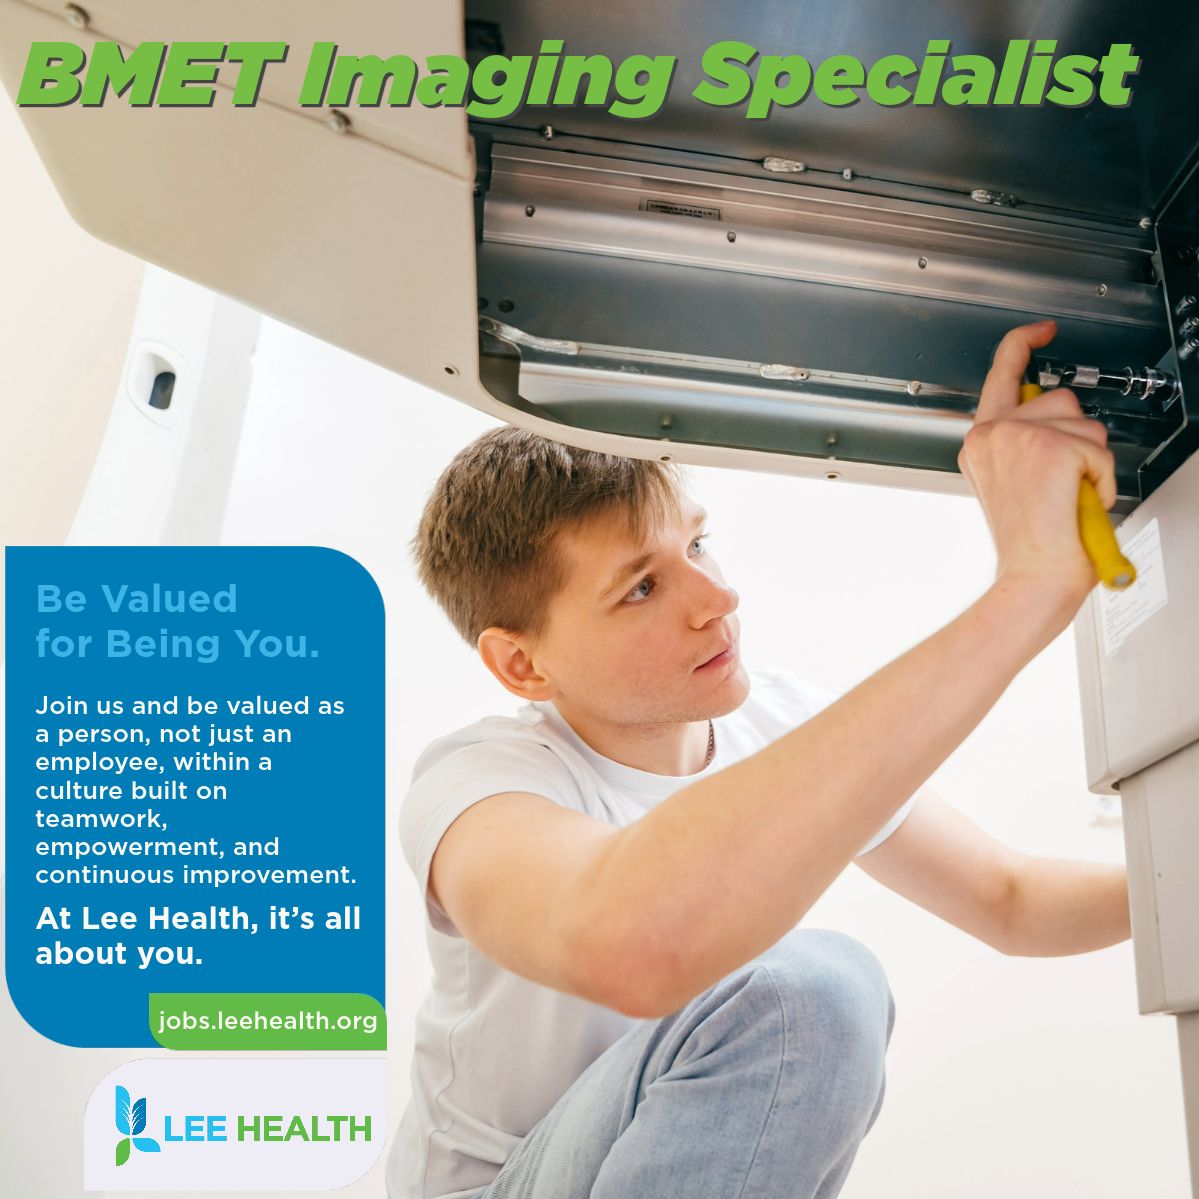 Are you a BMET Specialist with experience in radiology equipment? Lee Health has a great career opportunity for you! Learn More: buff.ly/4167bt7 Questions? Email: Becky.Kennedy@LeeHealth.org #BMET #Radiology #LeeHealth #Career #FortMyers #Florida